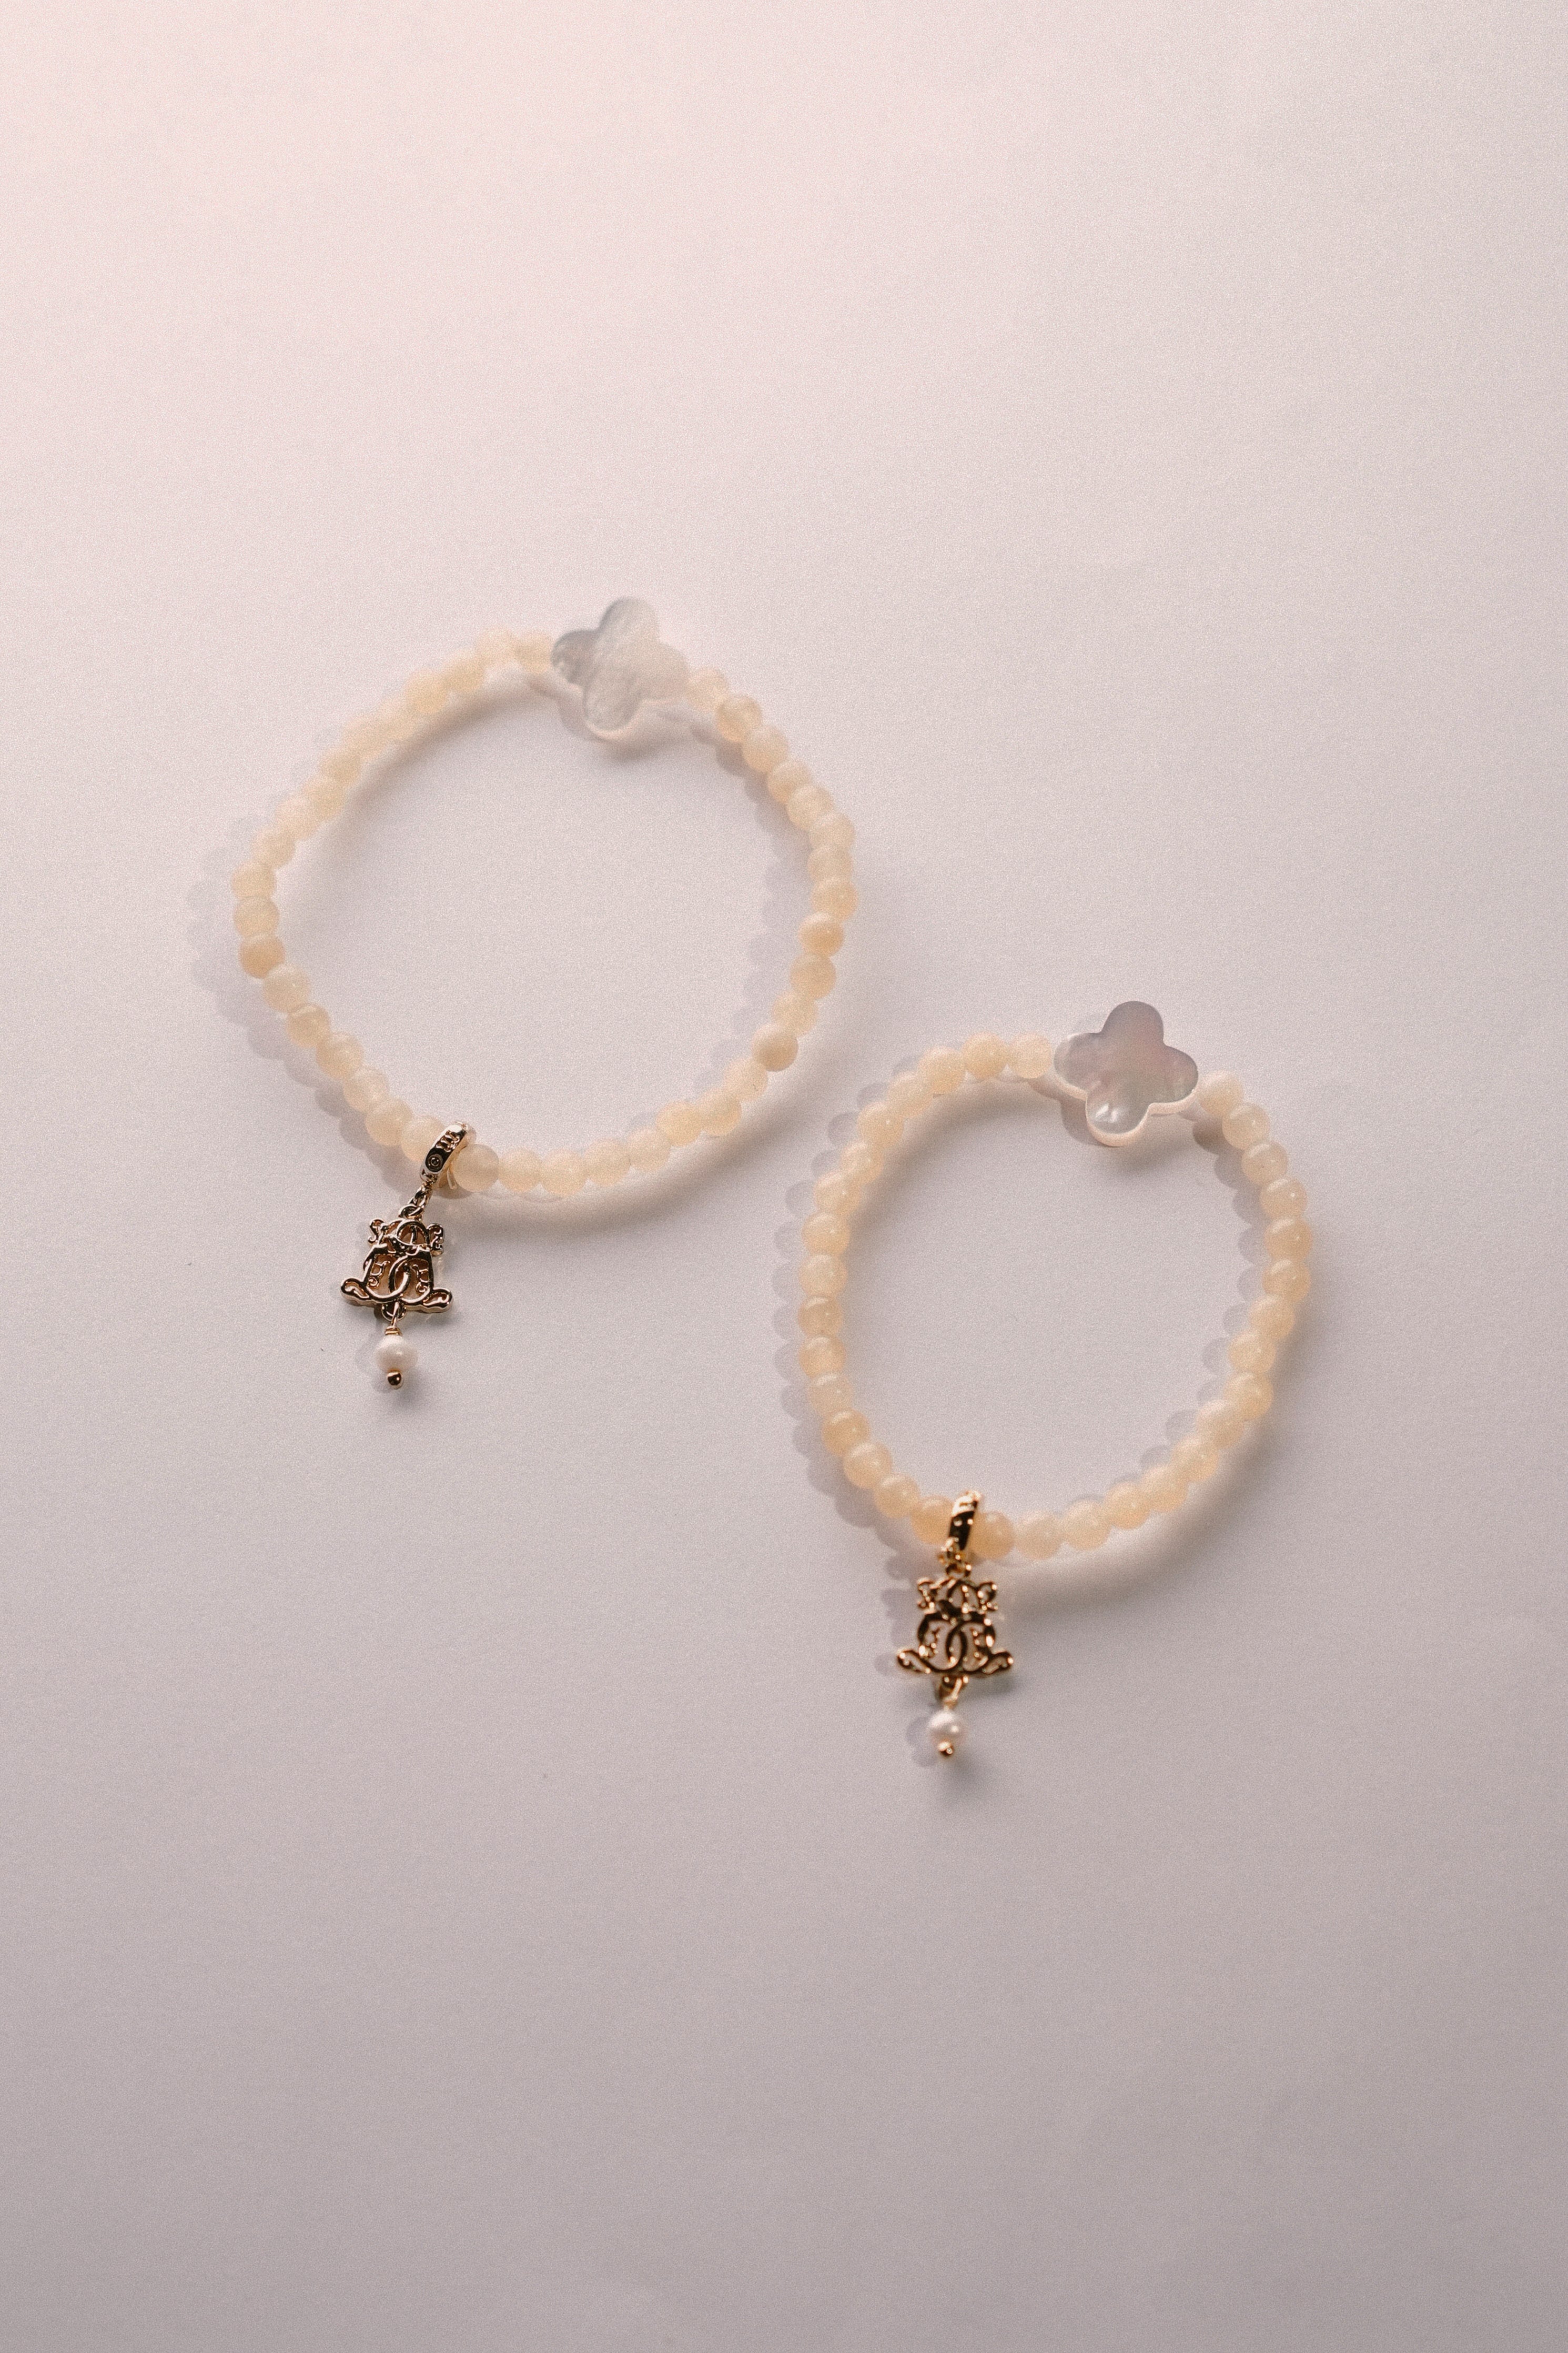 two bracelets placed on white background for photoshoot